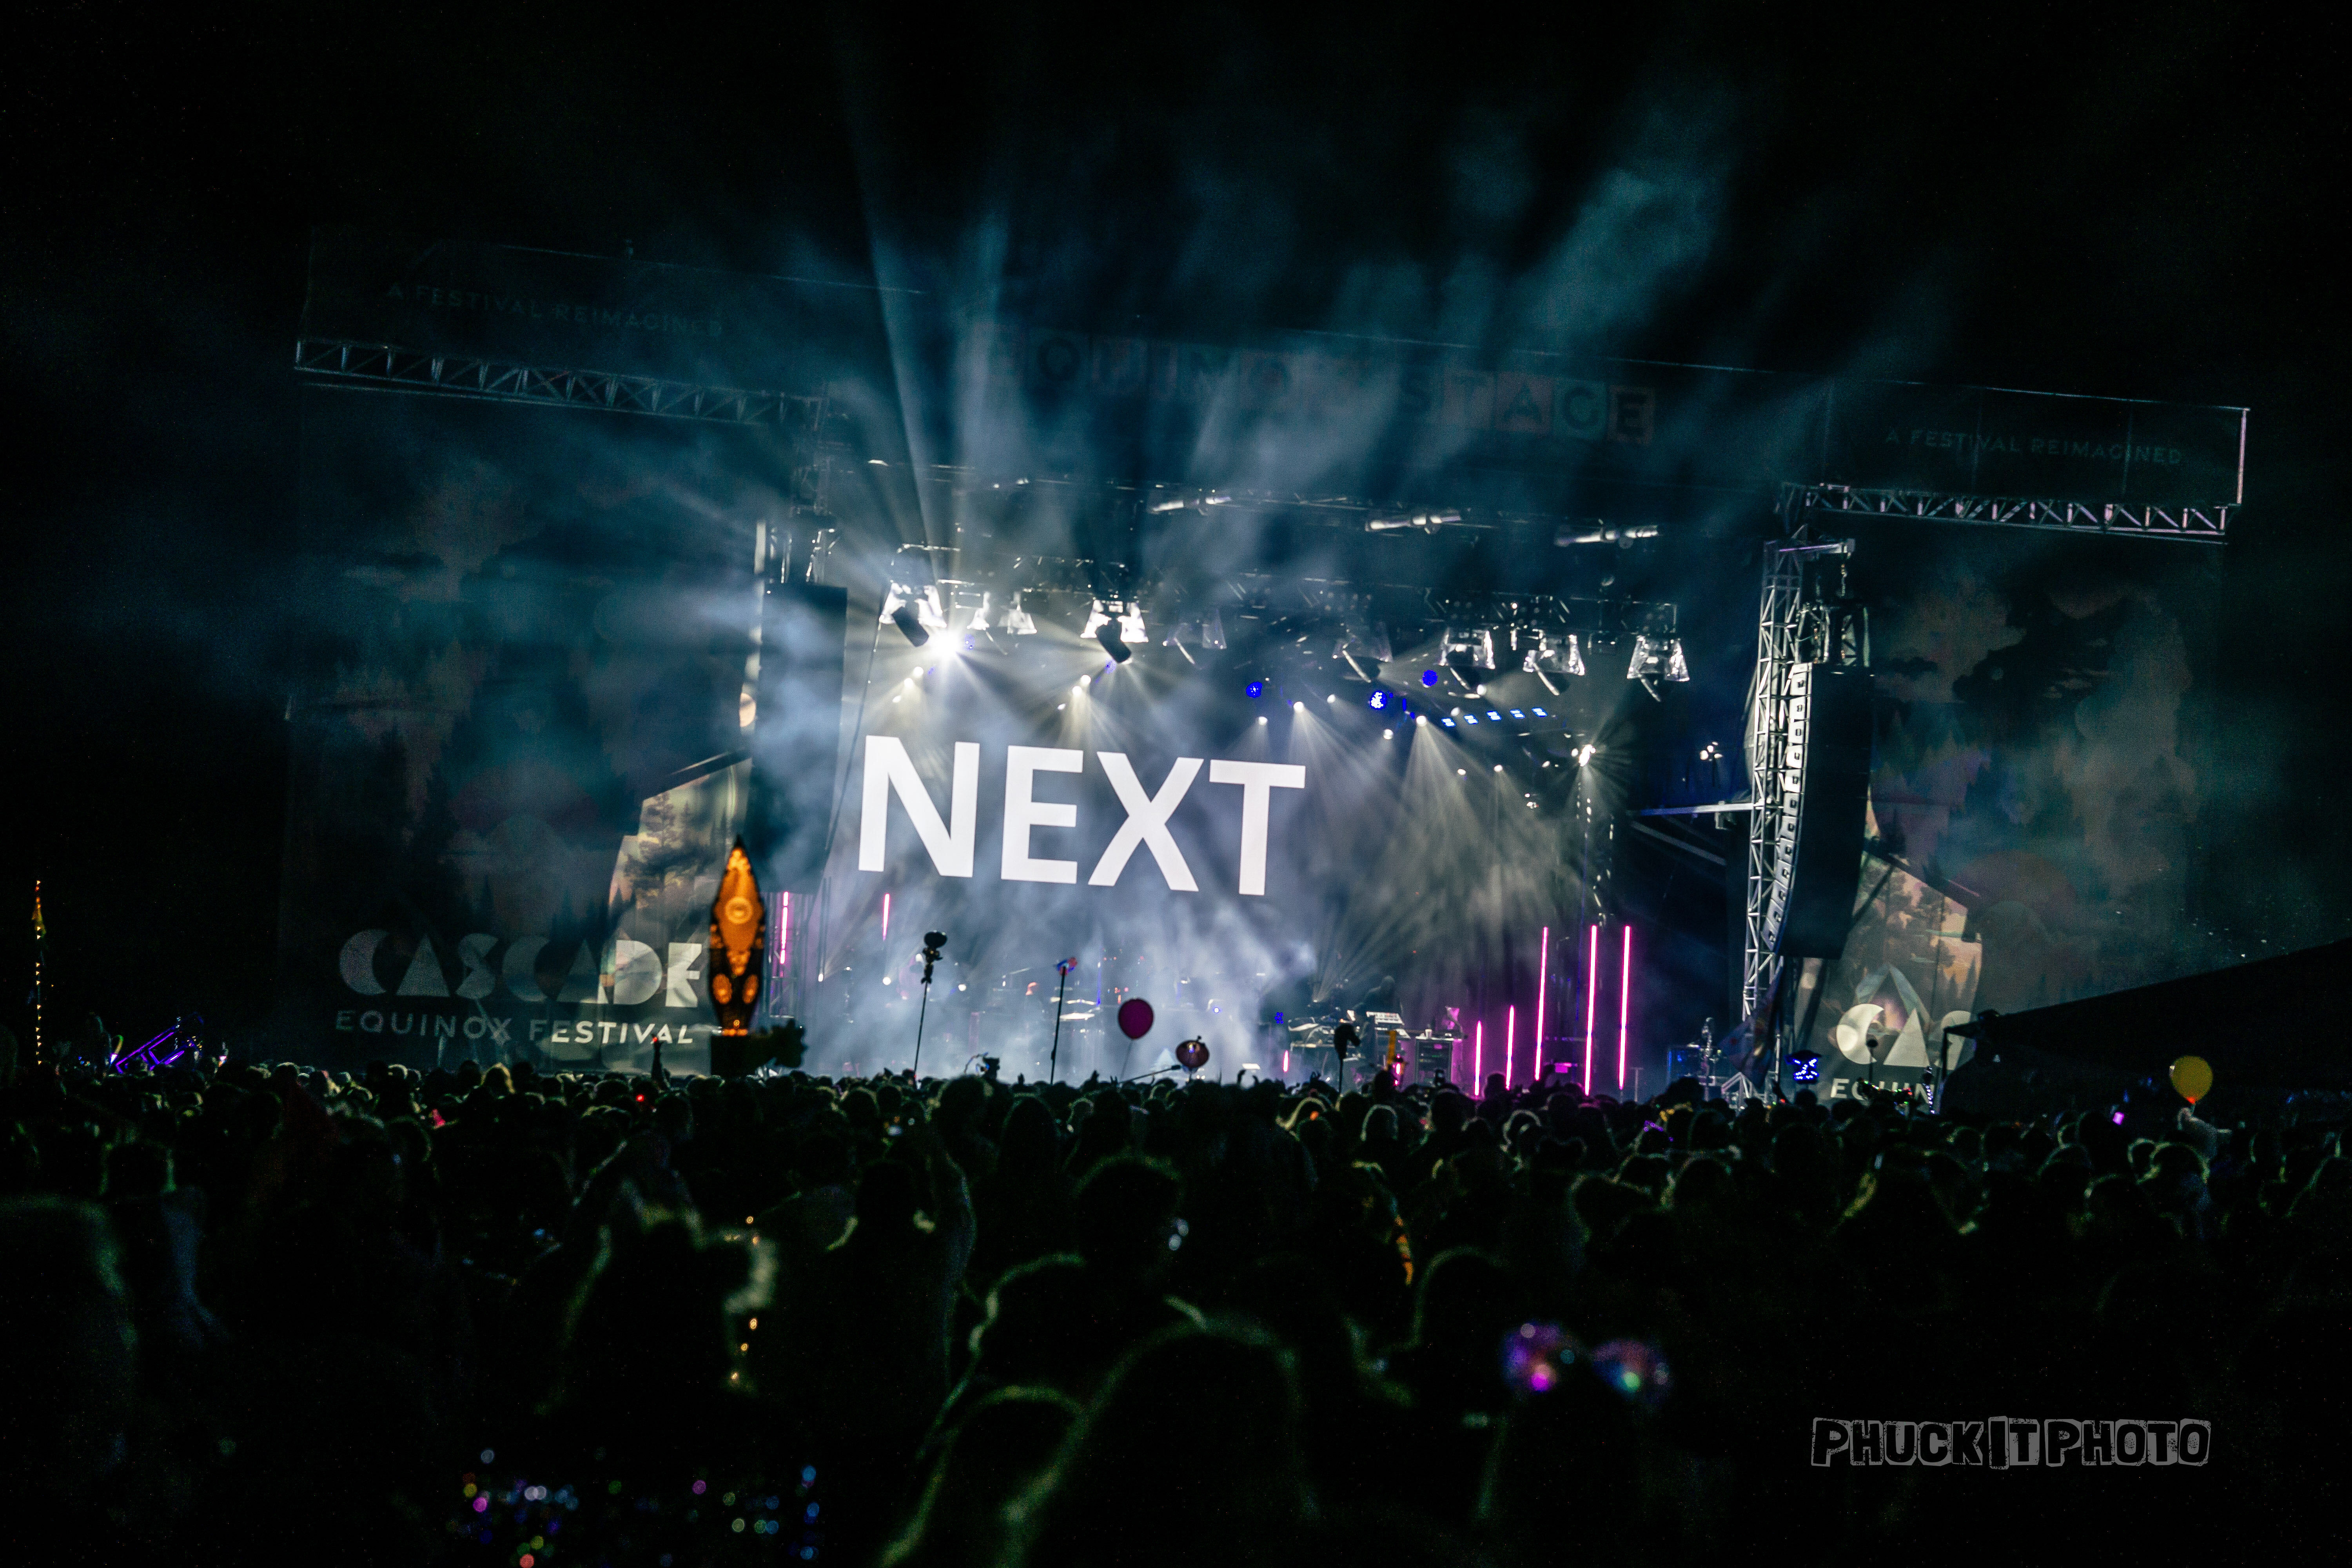 Mainstage at the Cascade Equinox festival featuring the word "NEXT" on screen